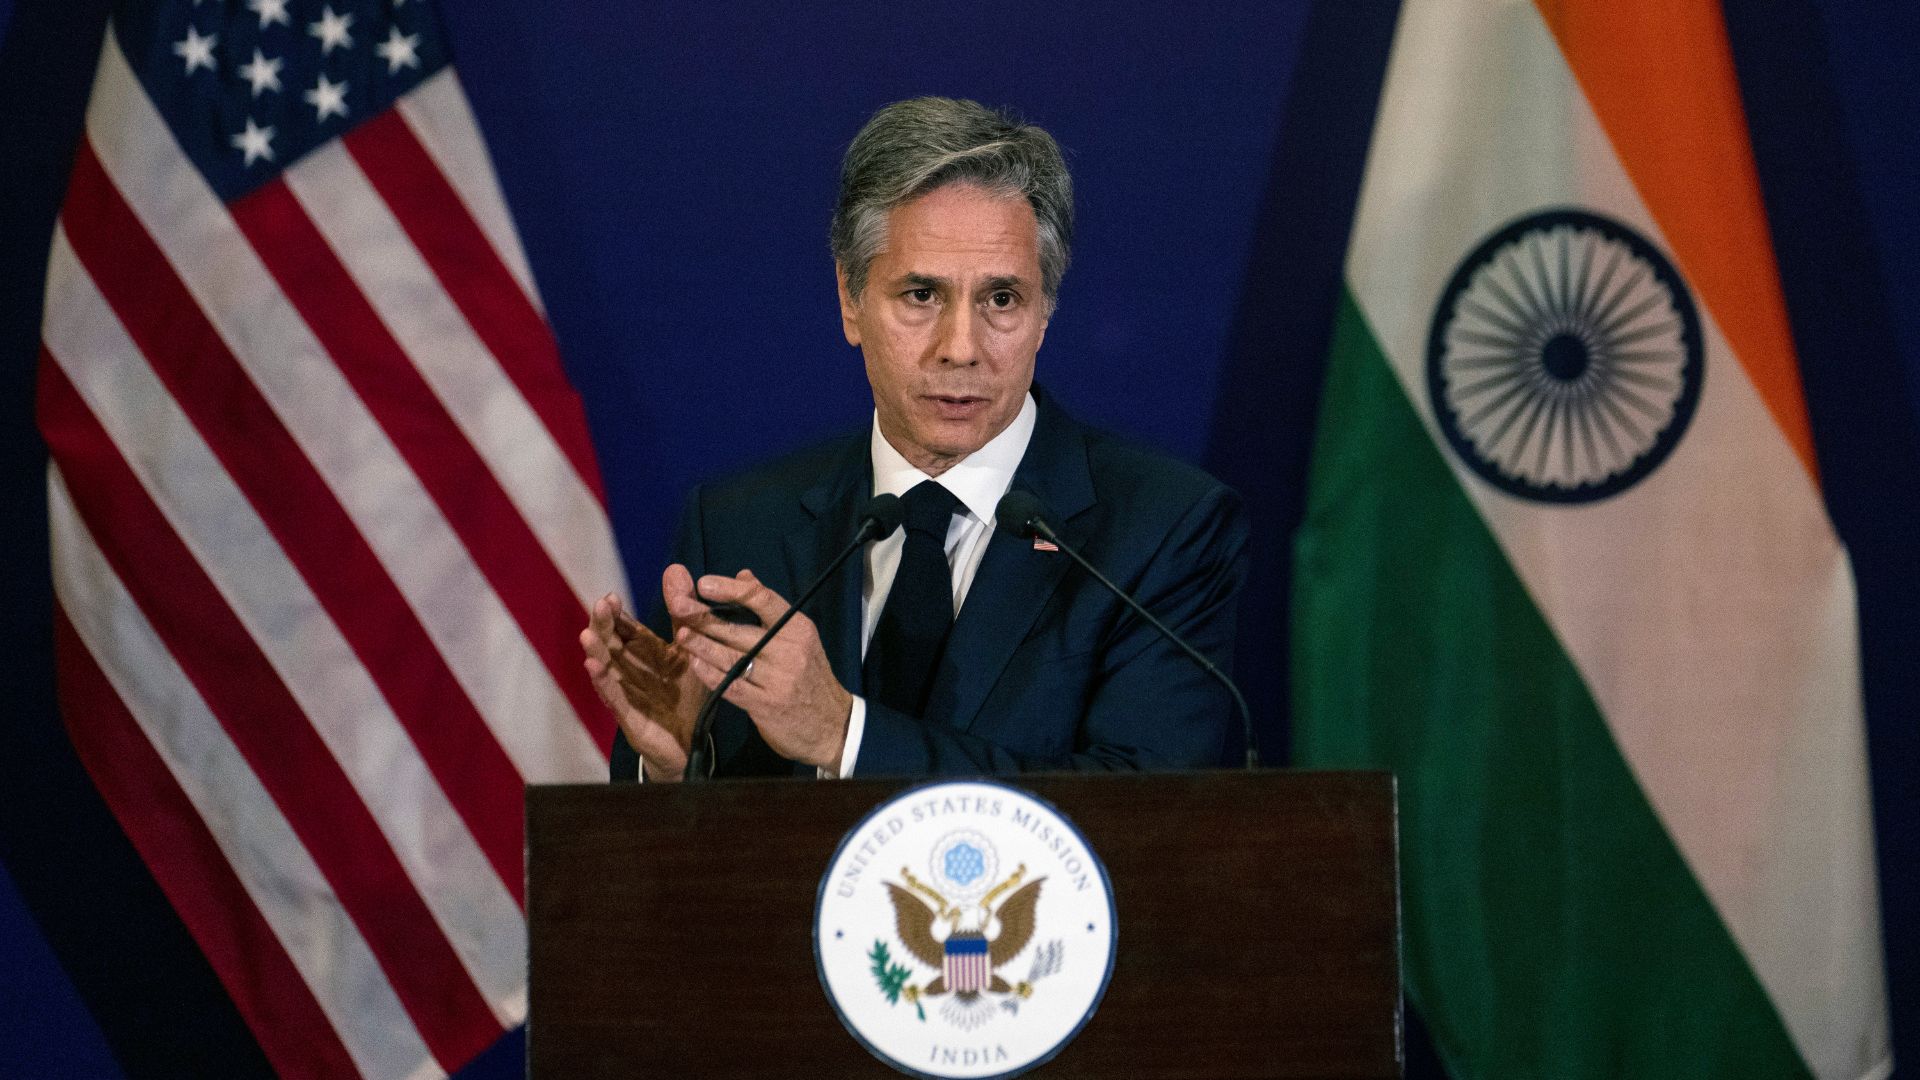 Secretary Blinken speaks during a press conference on the sidelines of the G20 foreign ministers meeting. (Photograph by Altaf Qadri © AP Images)